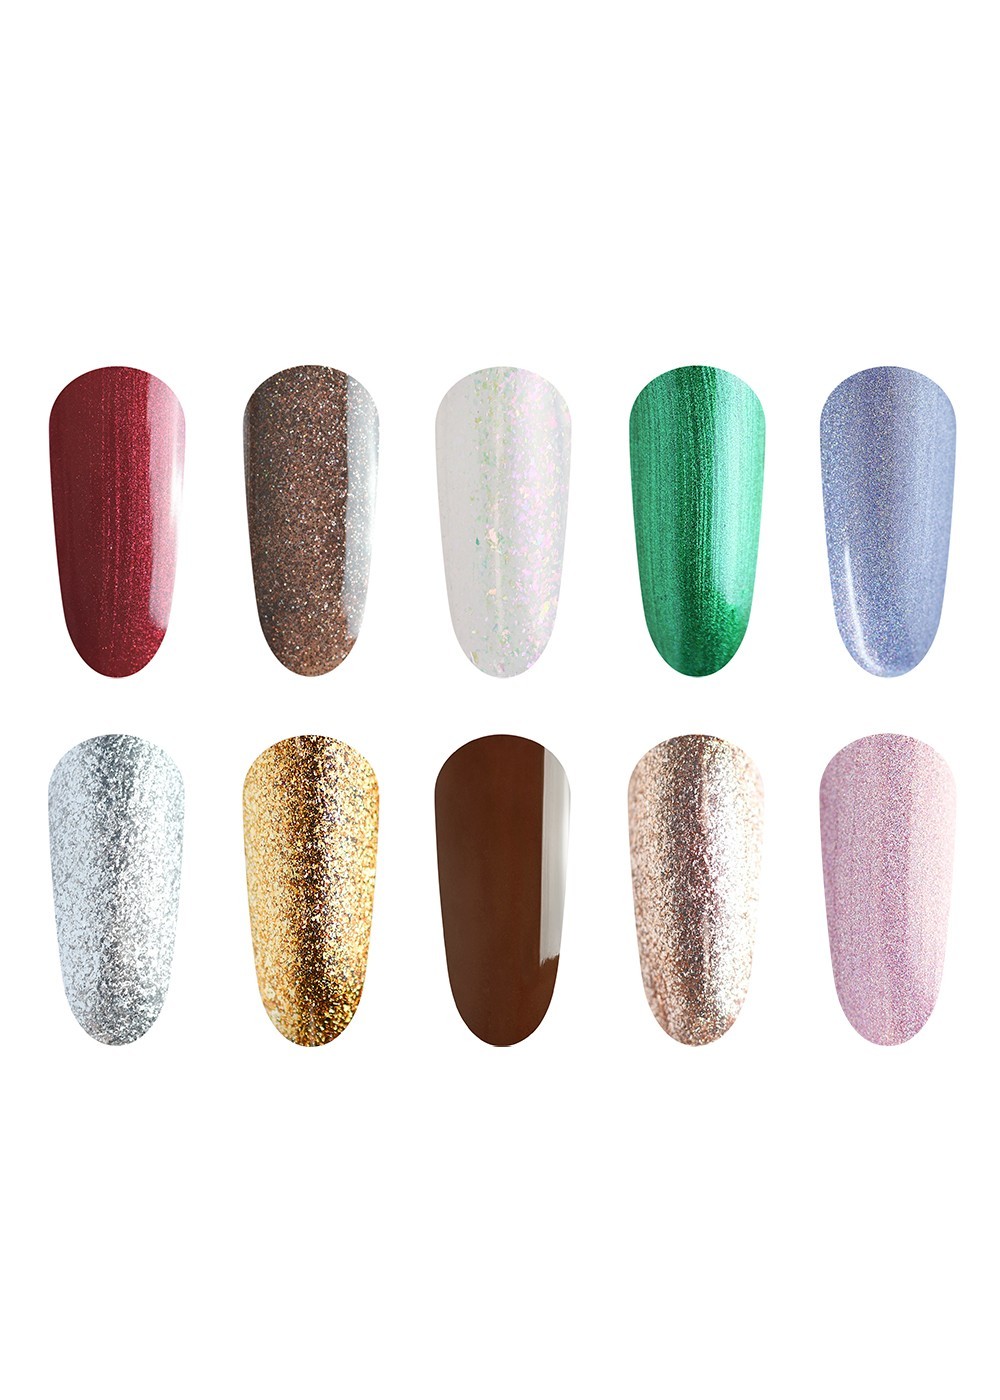 ALL THAT SHIMMERS COLLECTION MINI - THEGELBOTTLE INC - gel nail polish